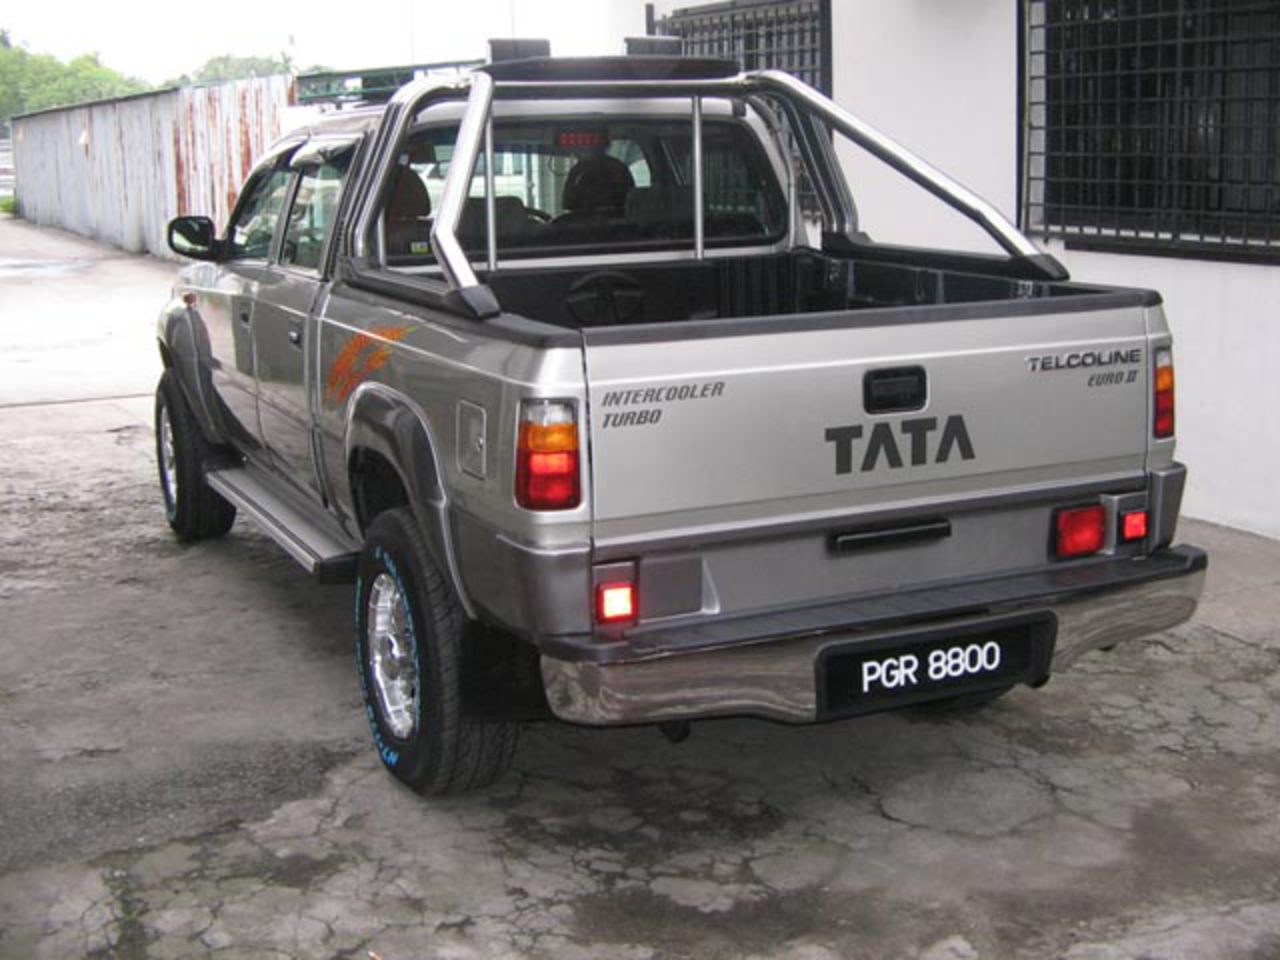 Tata 207: Photo gallery, complete information about model ...